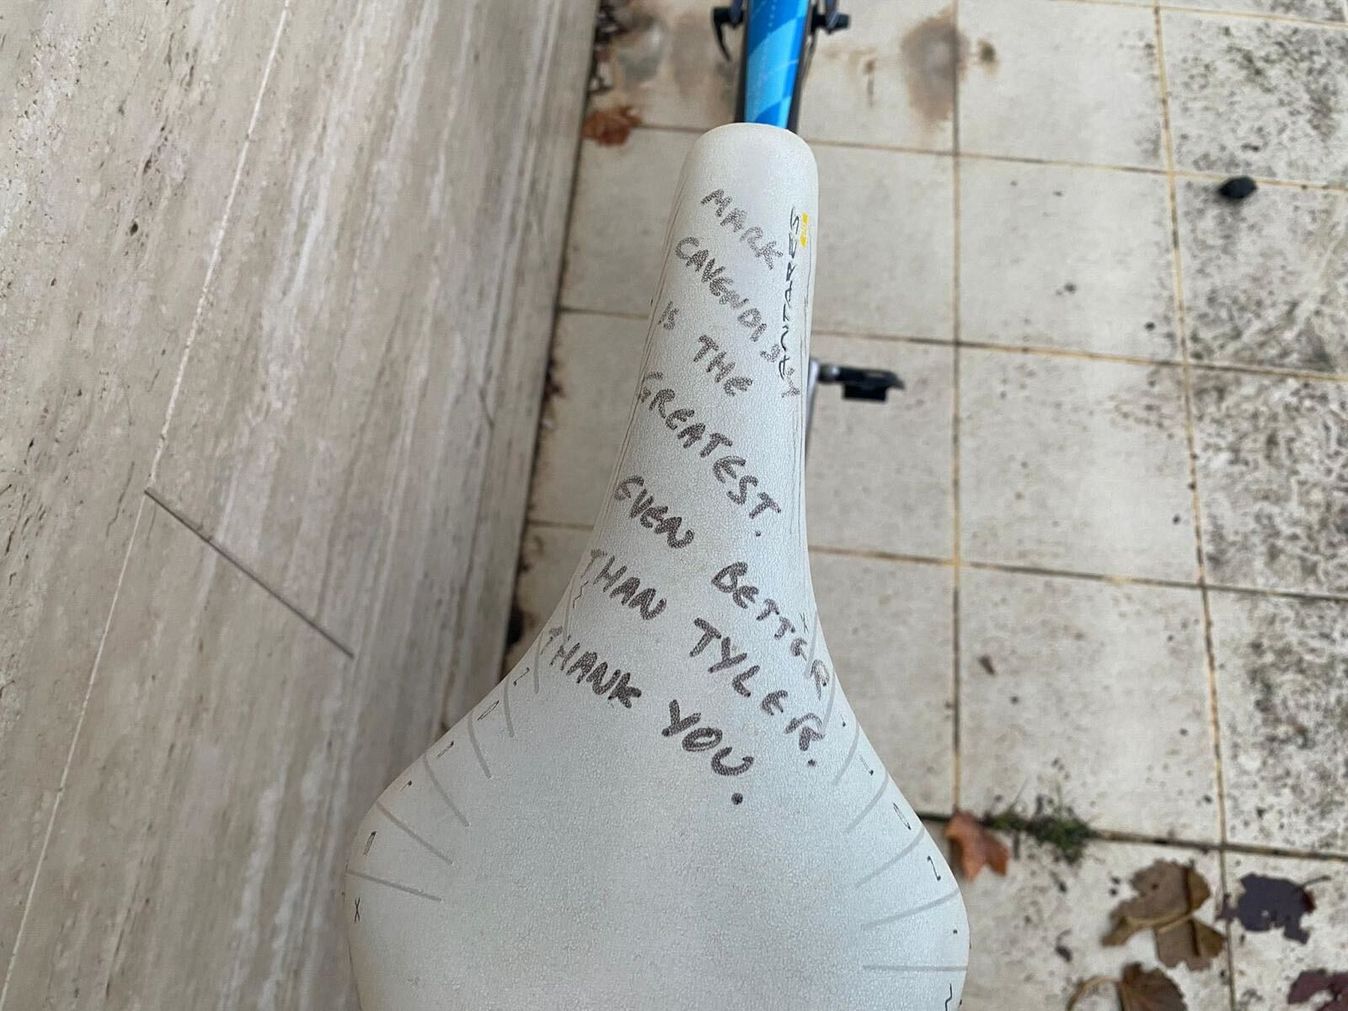 On top of the saddle is a handwritten note from Mark Cavendish himself